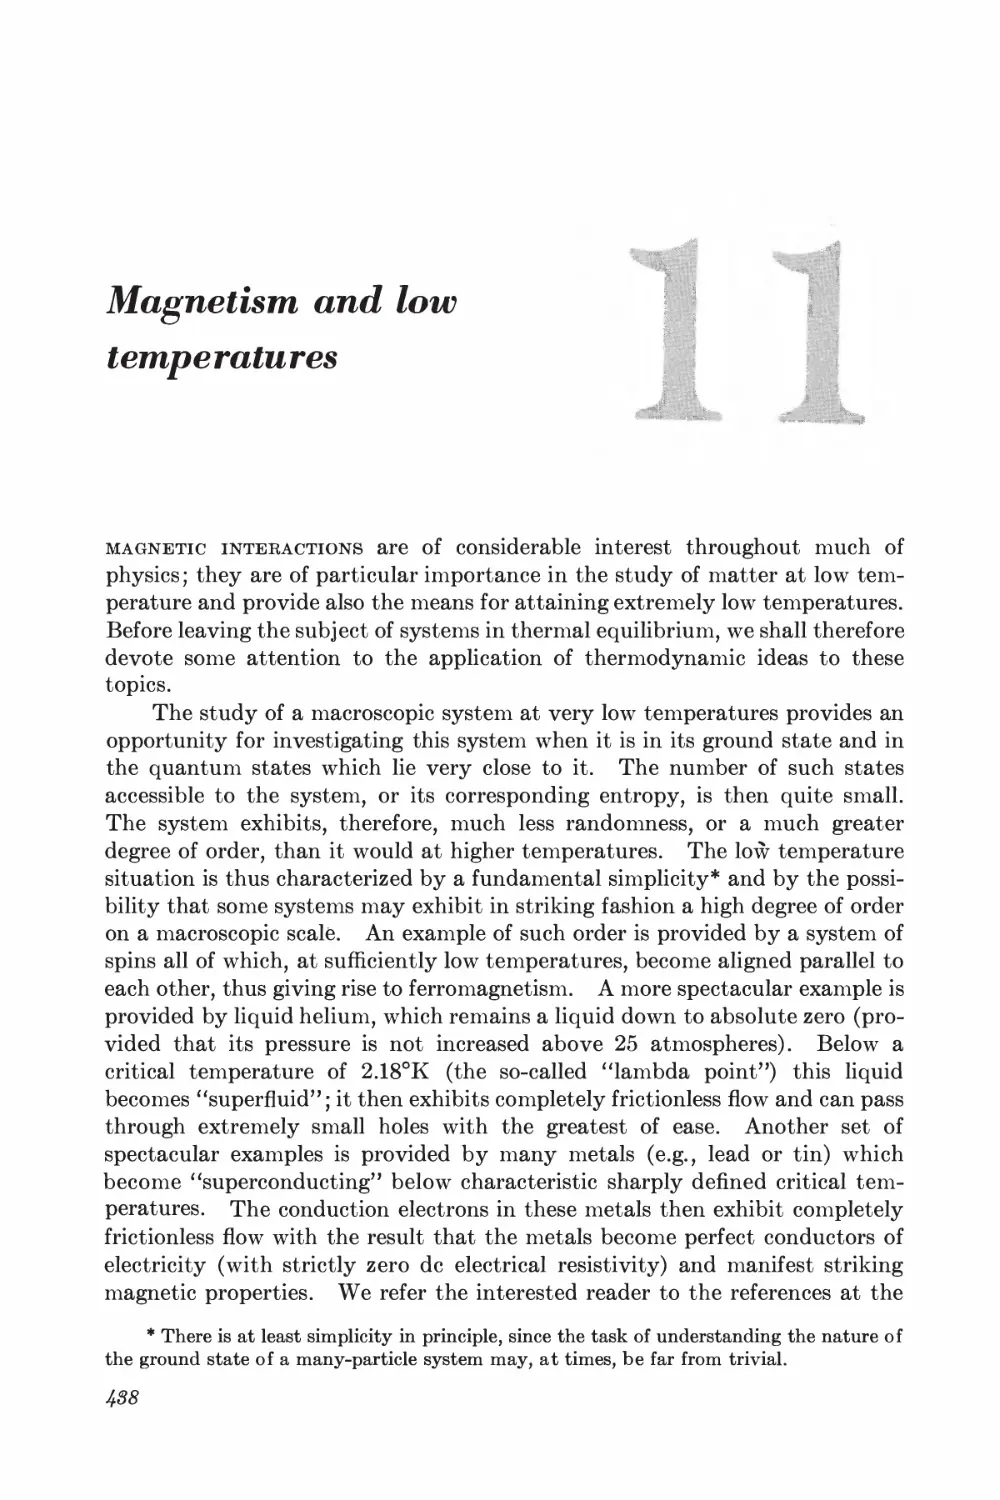 Chapter 11: Magnetism and Low Temperatures